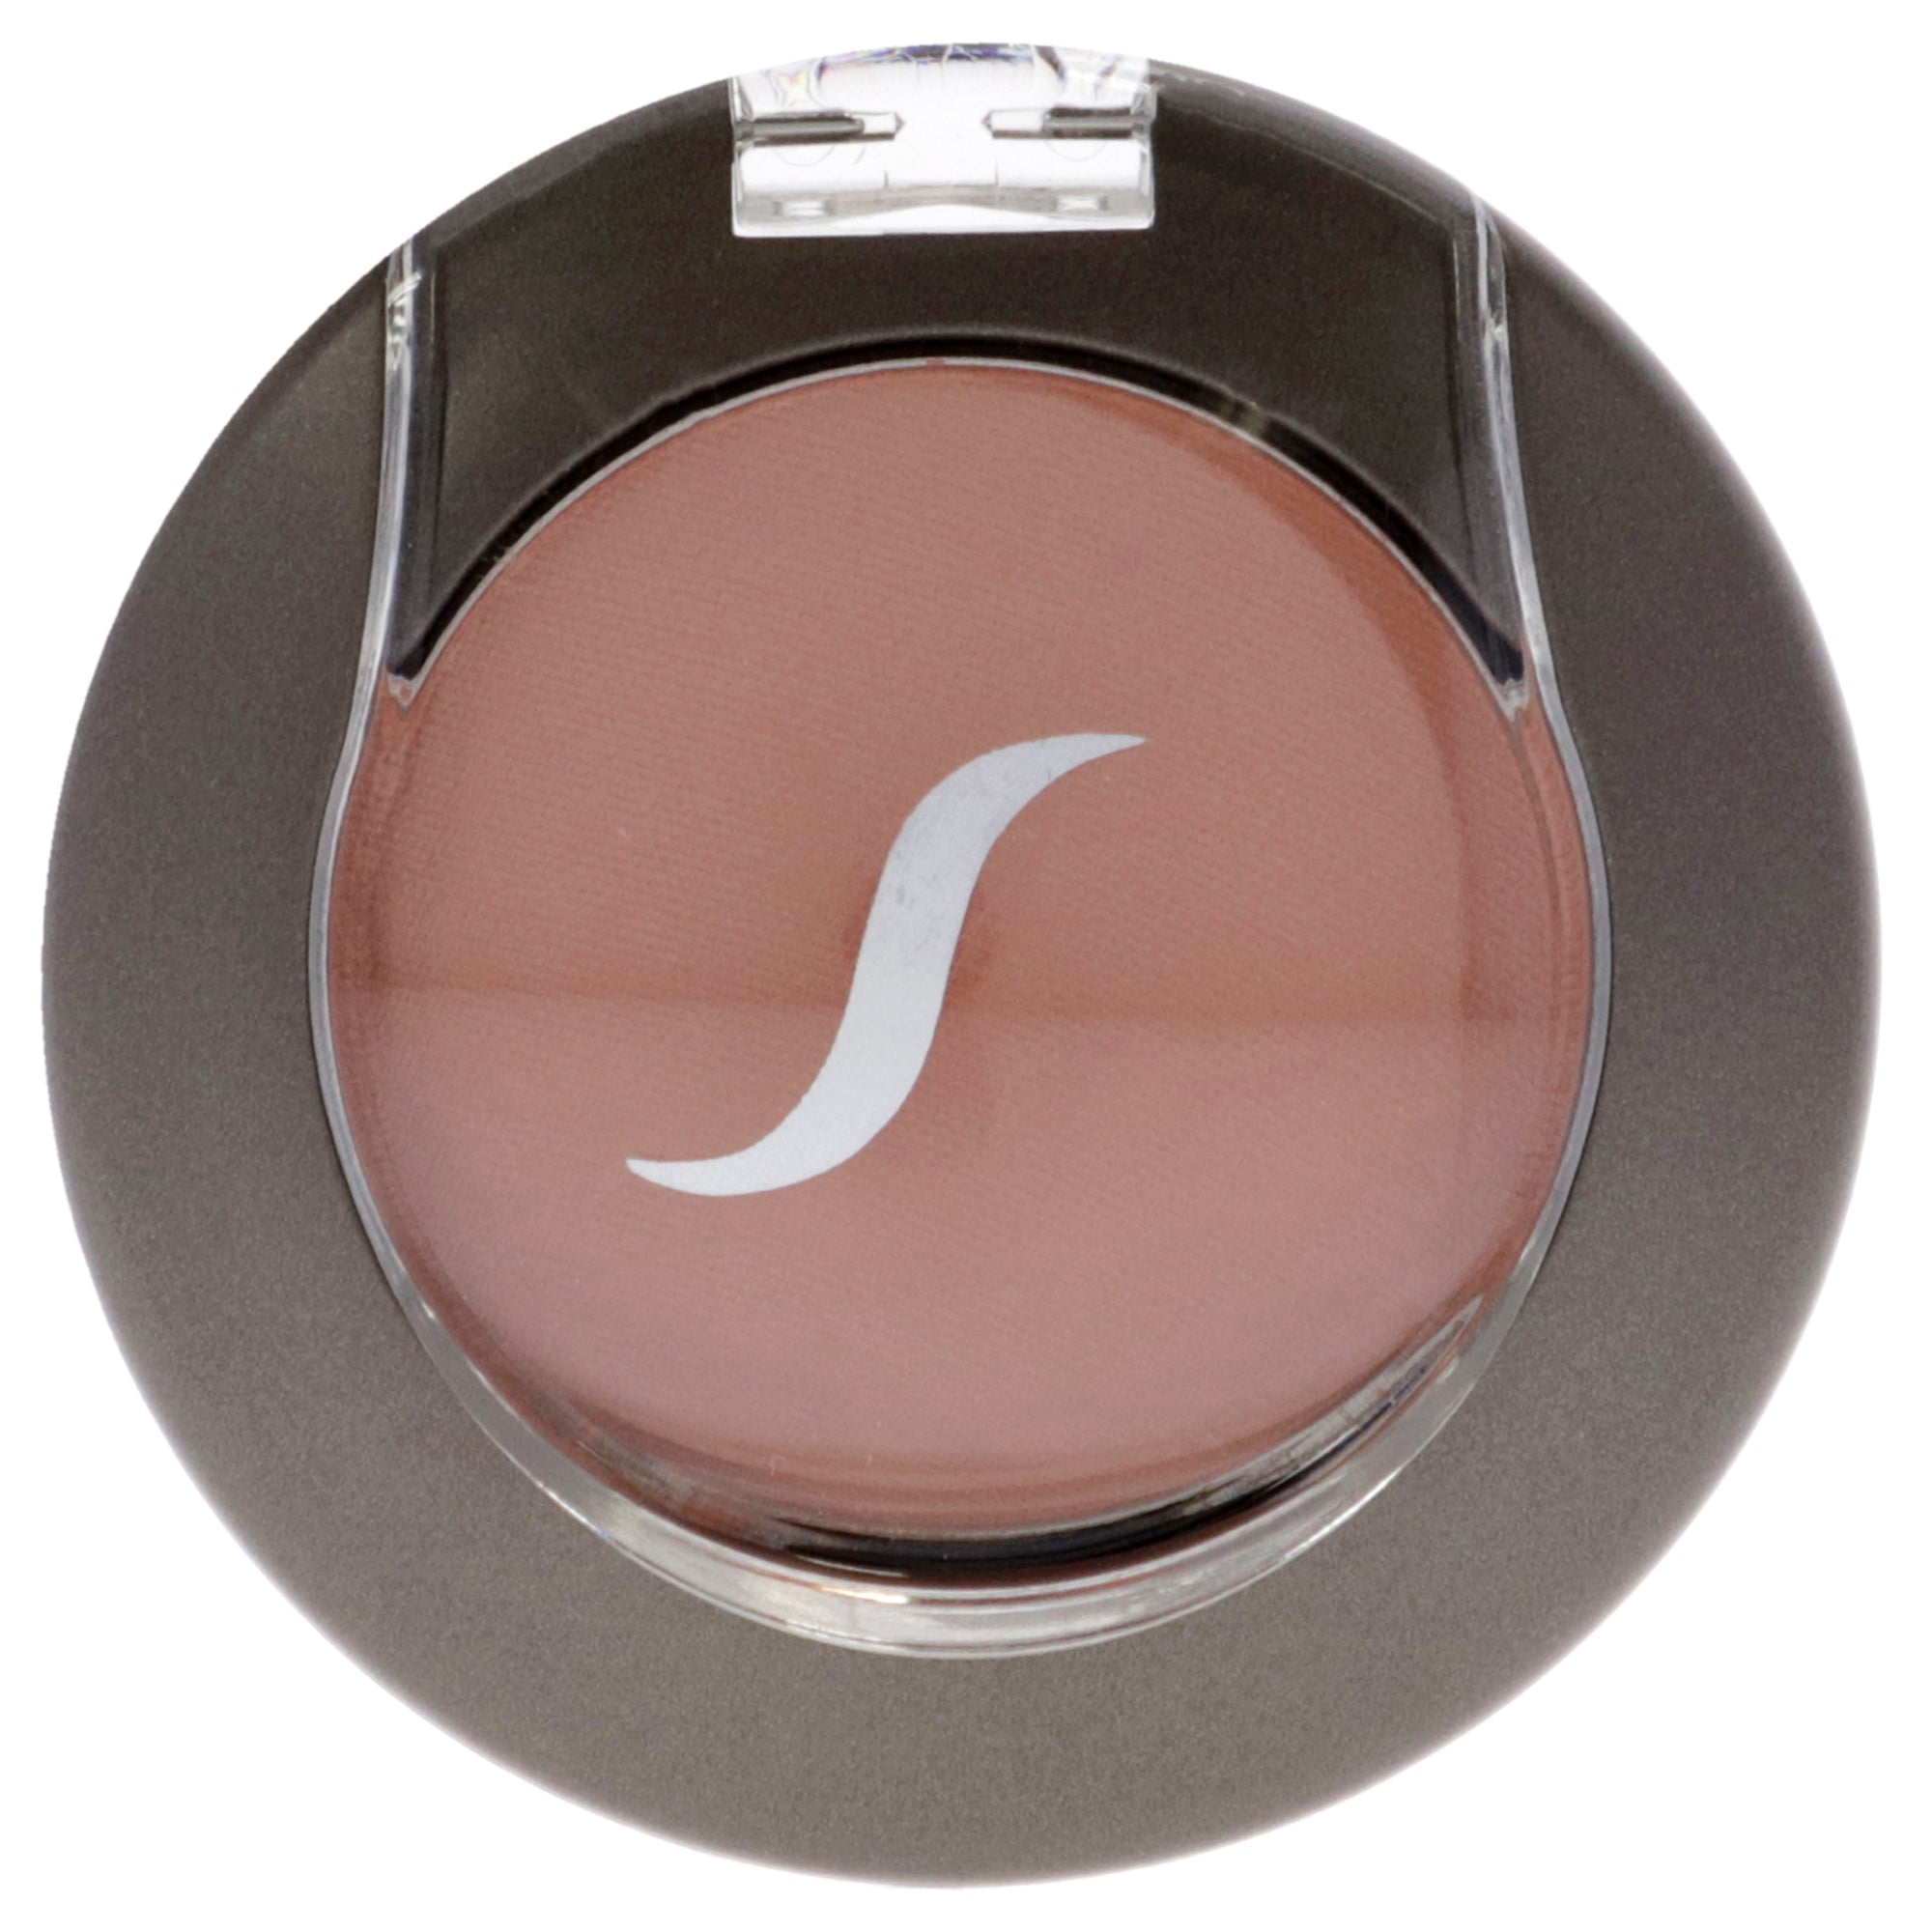 Wet and Dry Long Lasting Blush - Natural Blush by Sorme Cosmetics for Women - 0.14 oz Blush